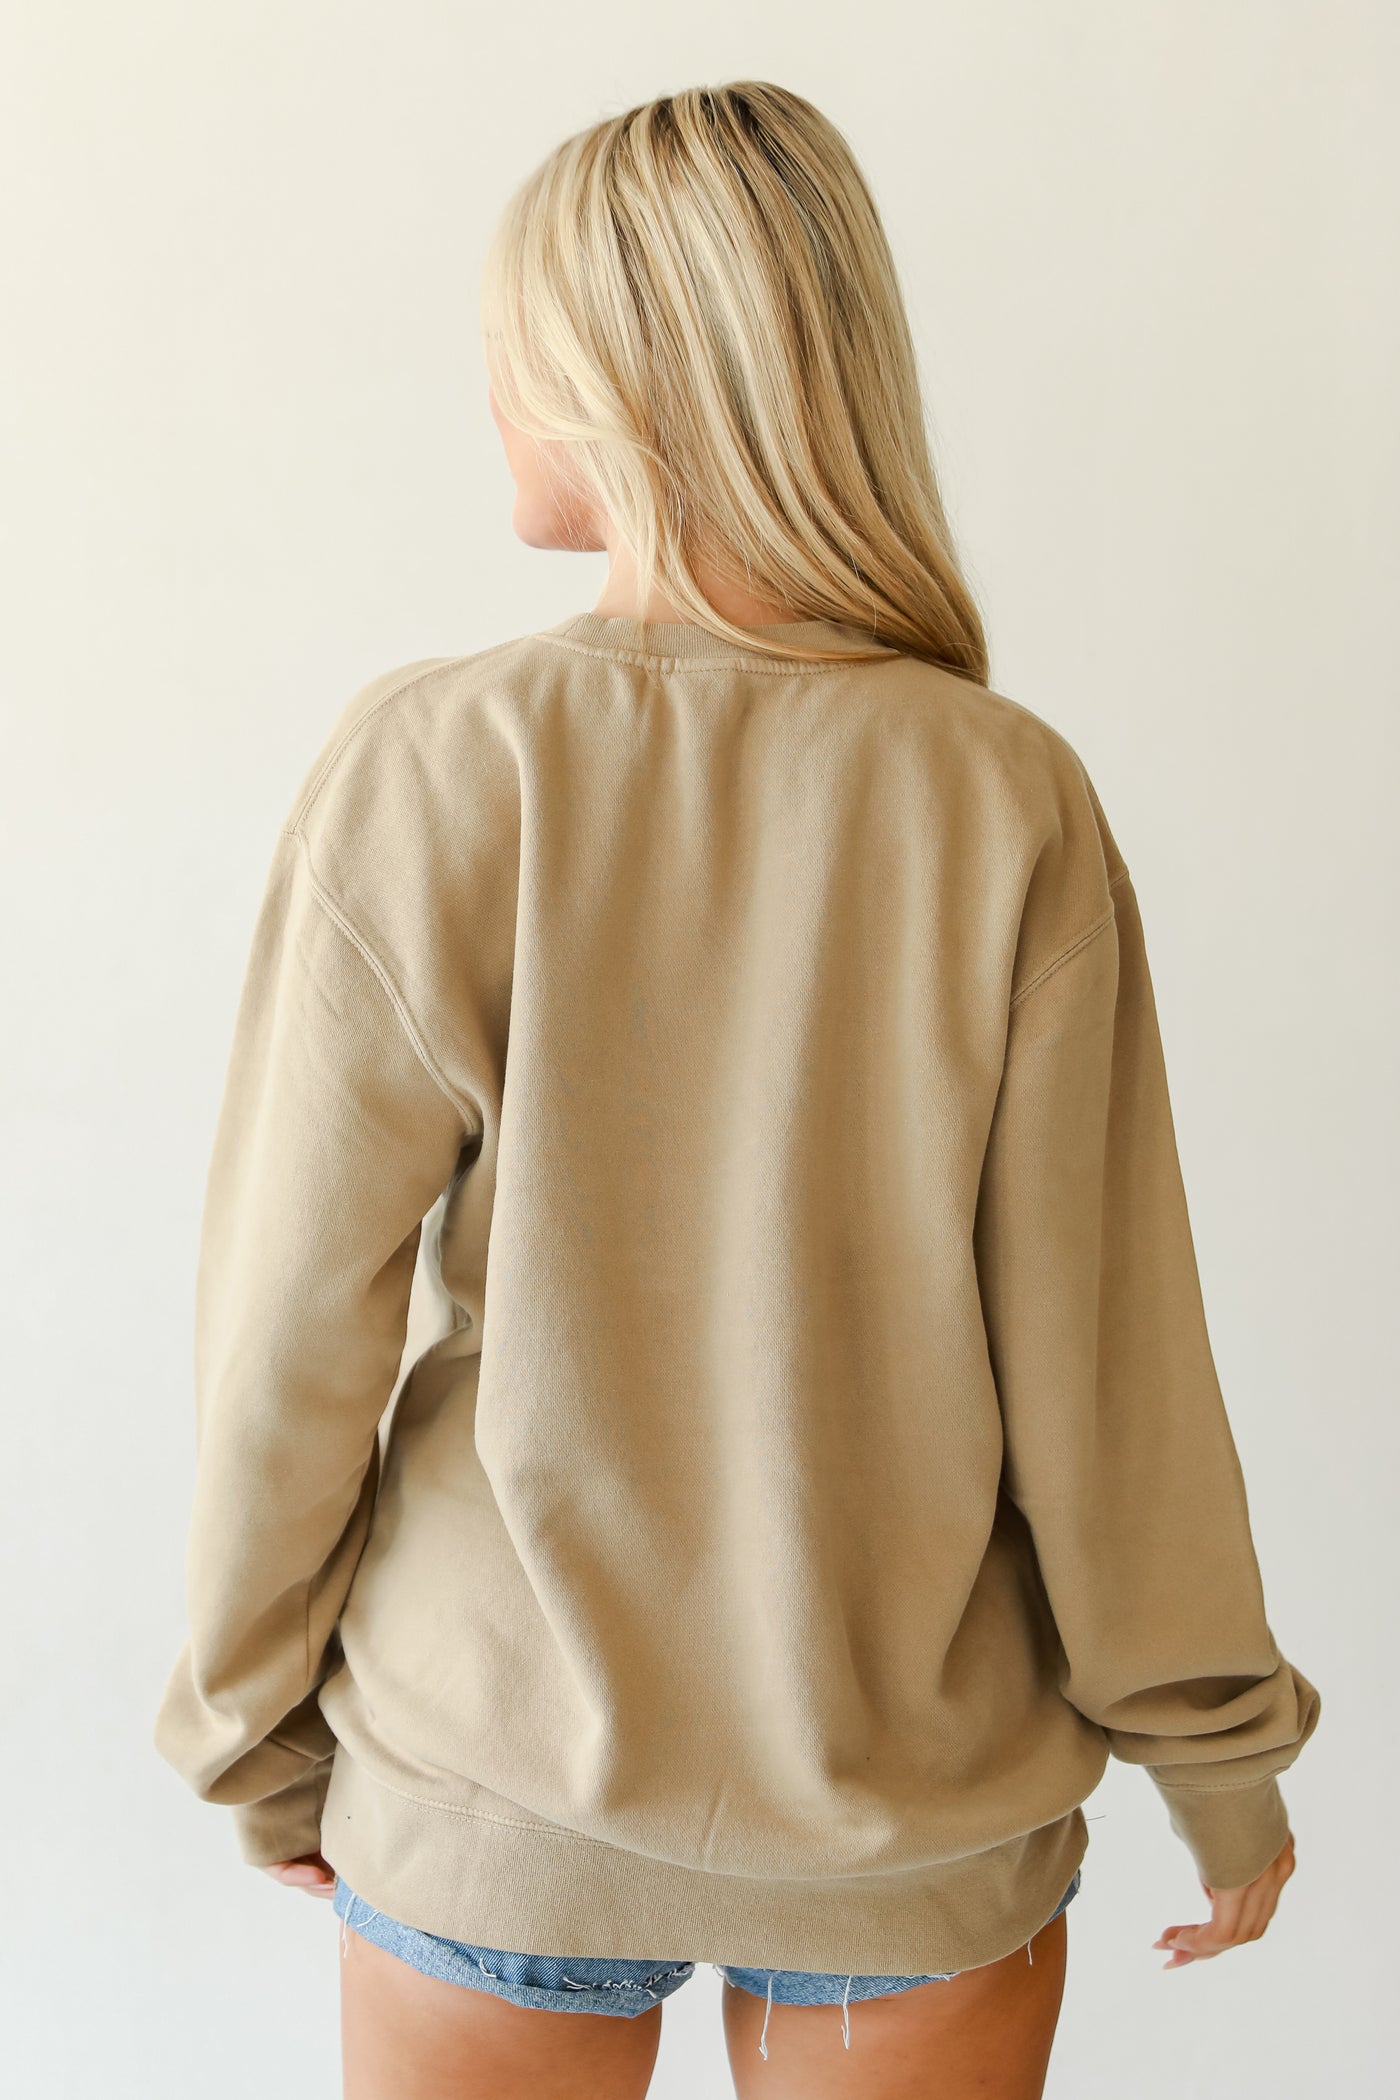 Tan Nashville Tennessee Pullover back view